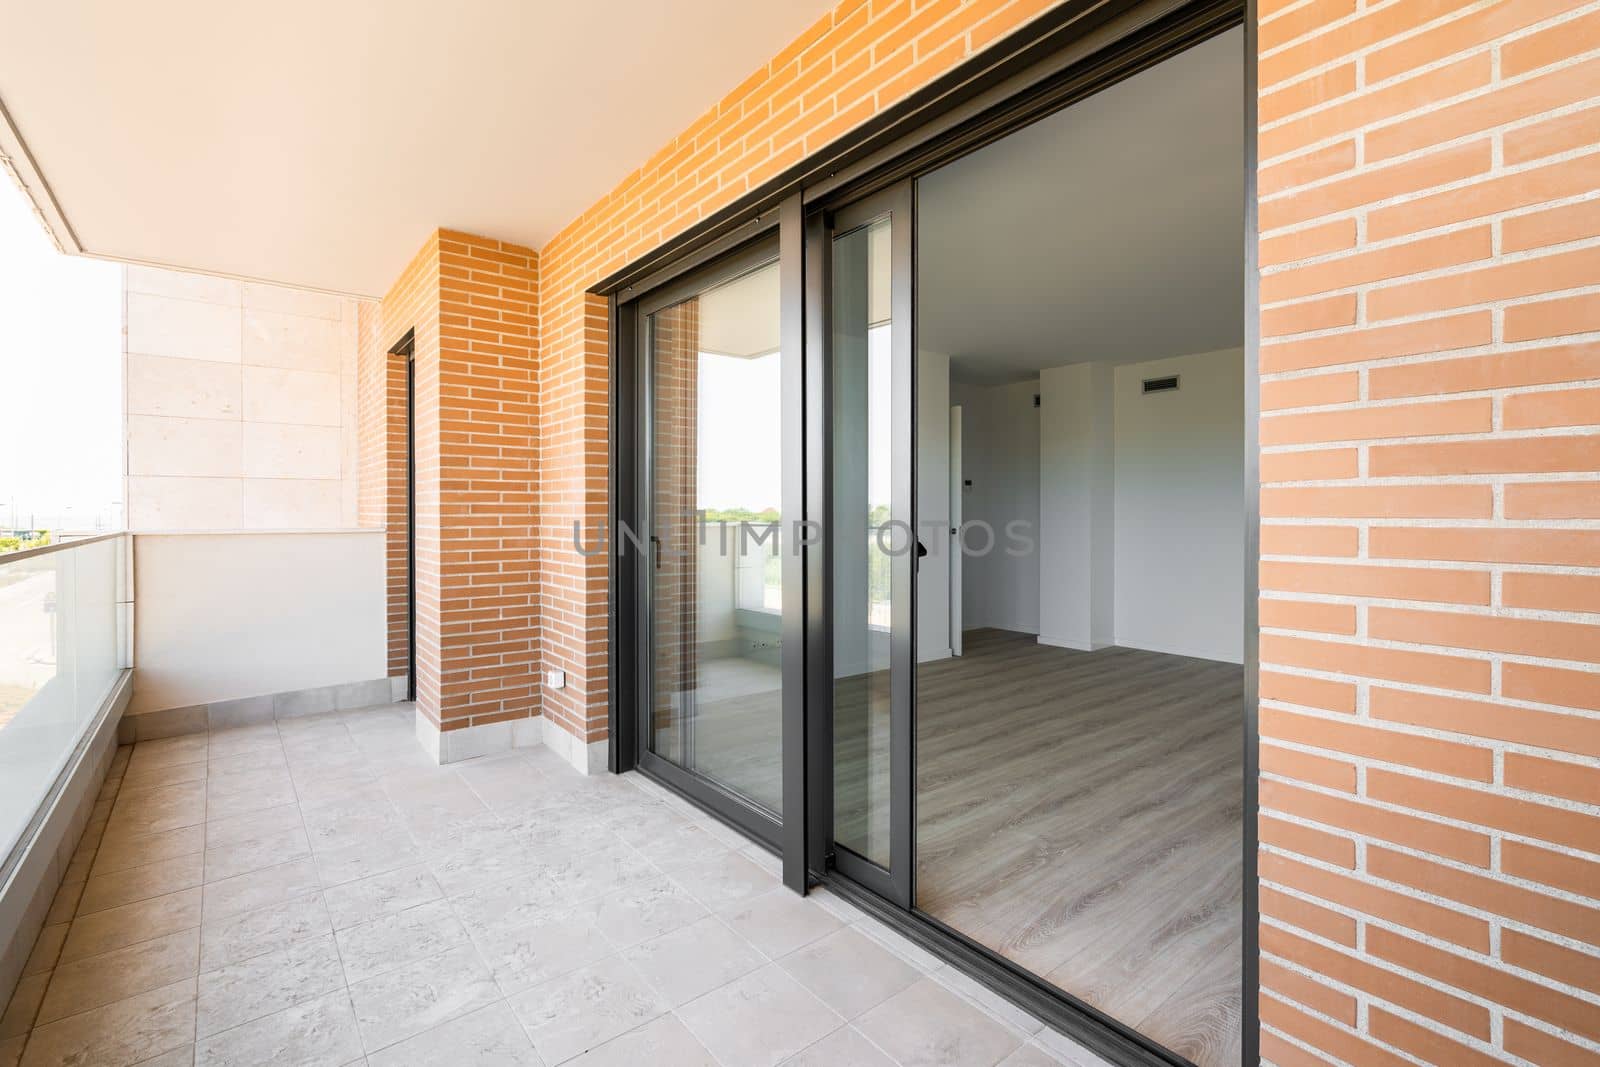 Side view of terrace opening after the large panoramic windows in luxury apartment of new building made of red brick and black metal frames. Concept of open air zone in the house.